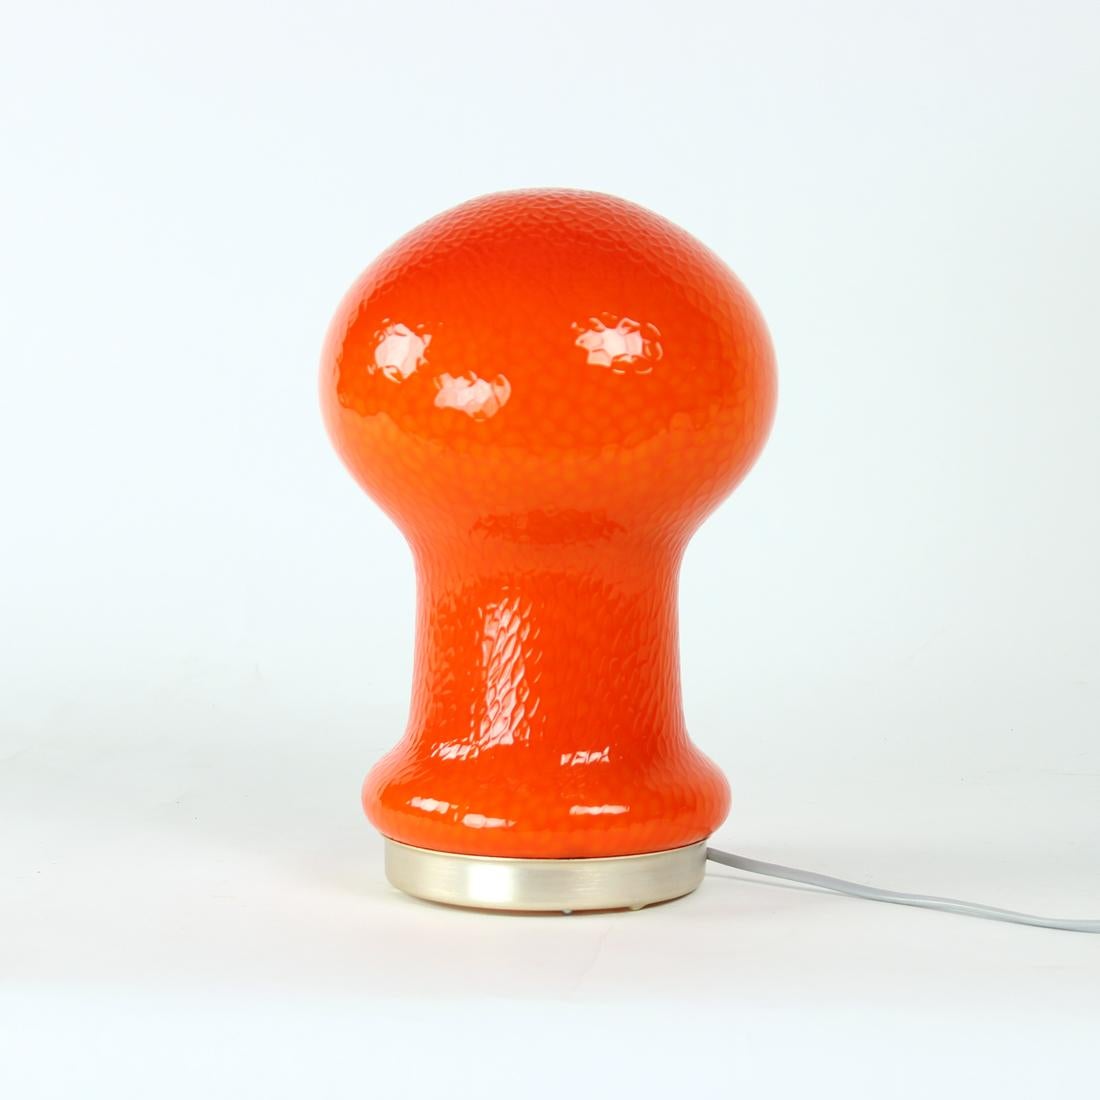 Beautiful table lamp produced by OPP Jihlava and designed by Stefan Tabery in 1960s. The lamp is made of orange opaline glass with a leather like finish on the lamp. The base is made of aluminum. Beautiful lamp and in excellent condition without any